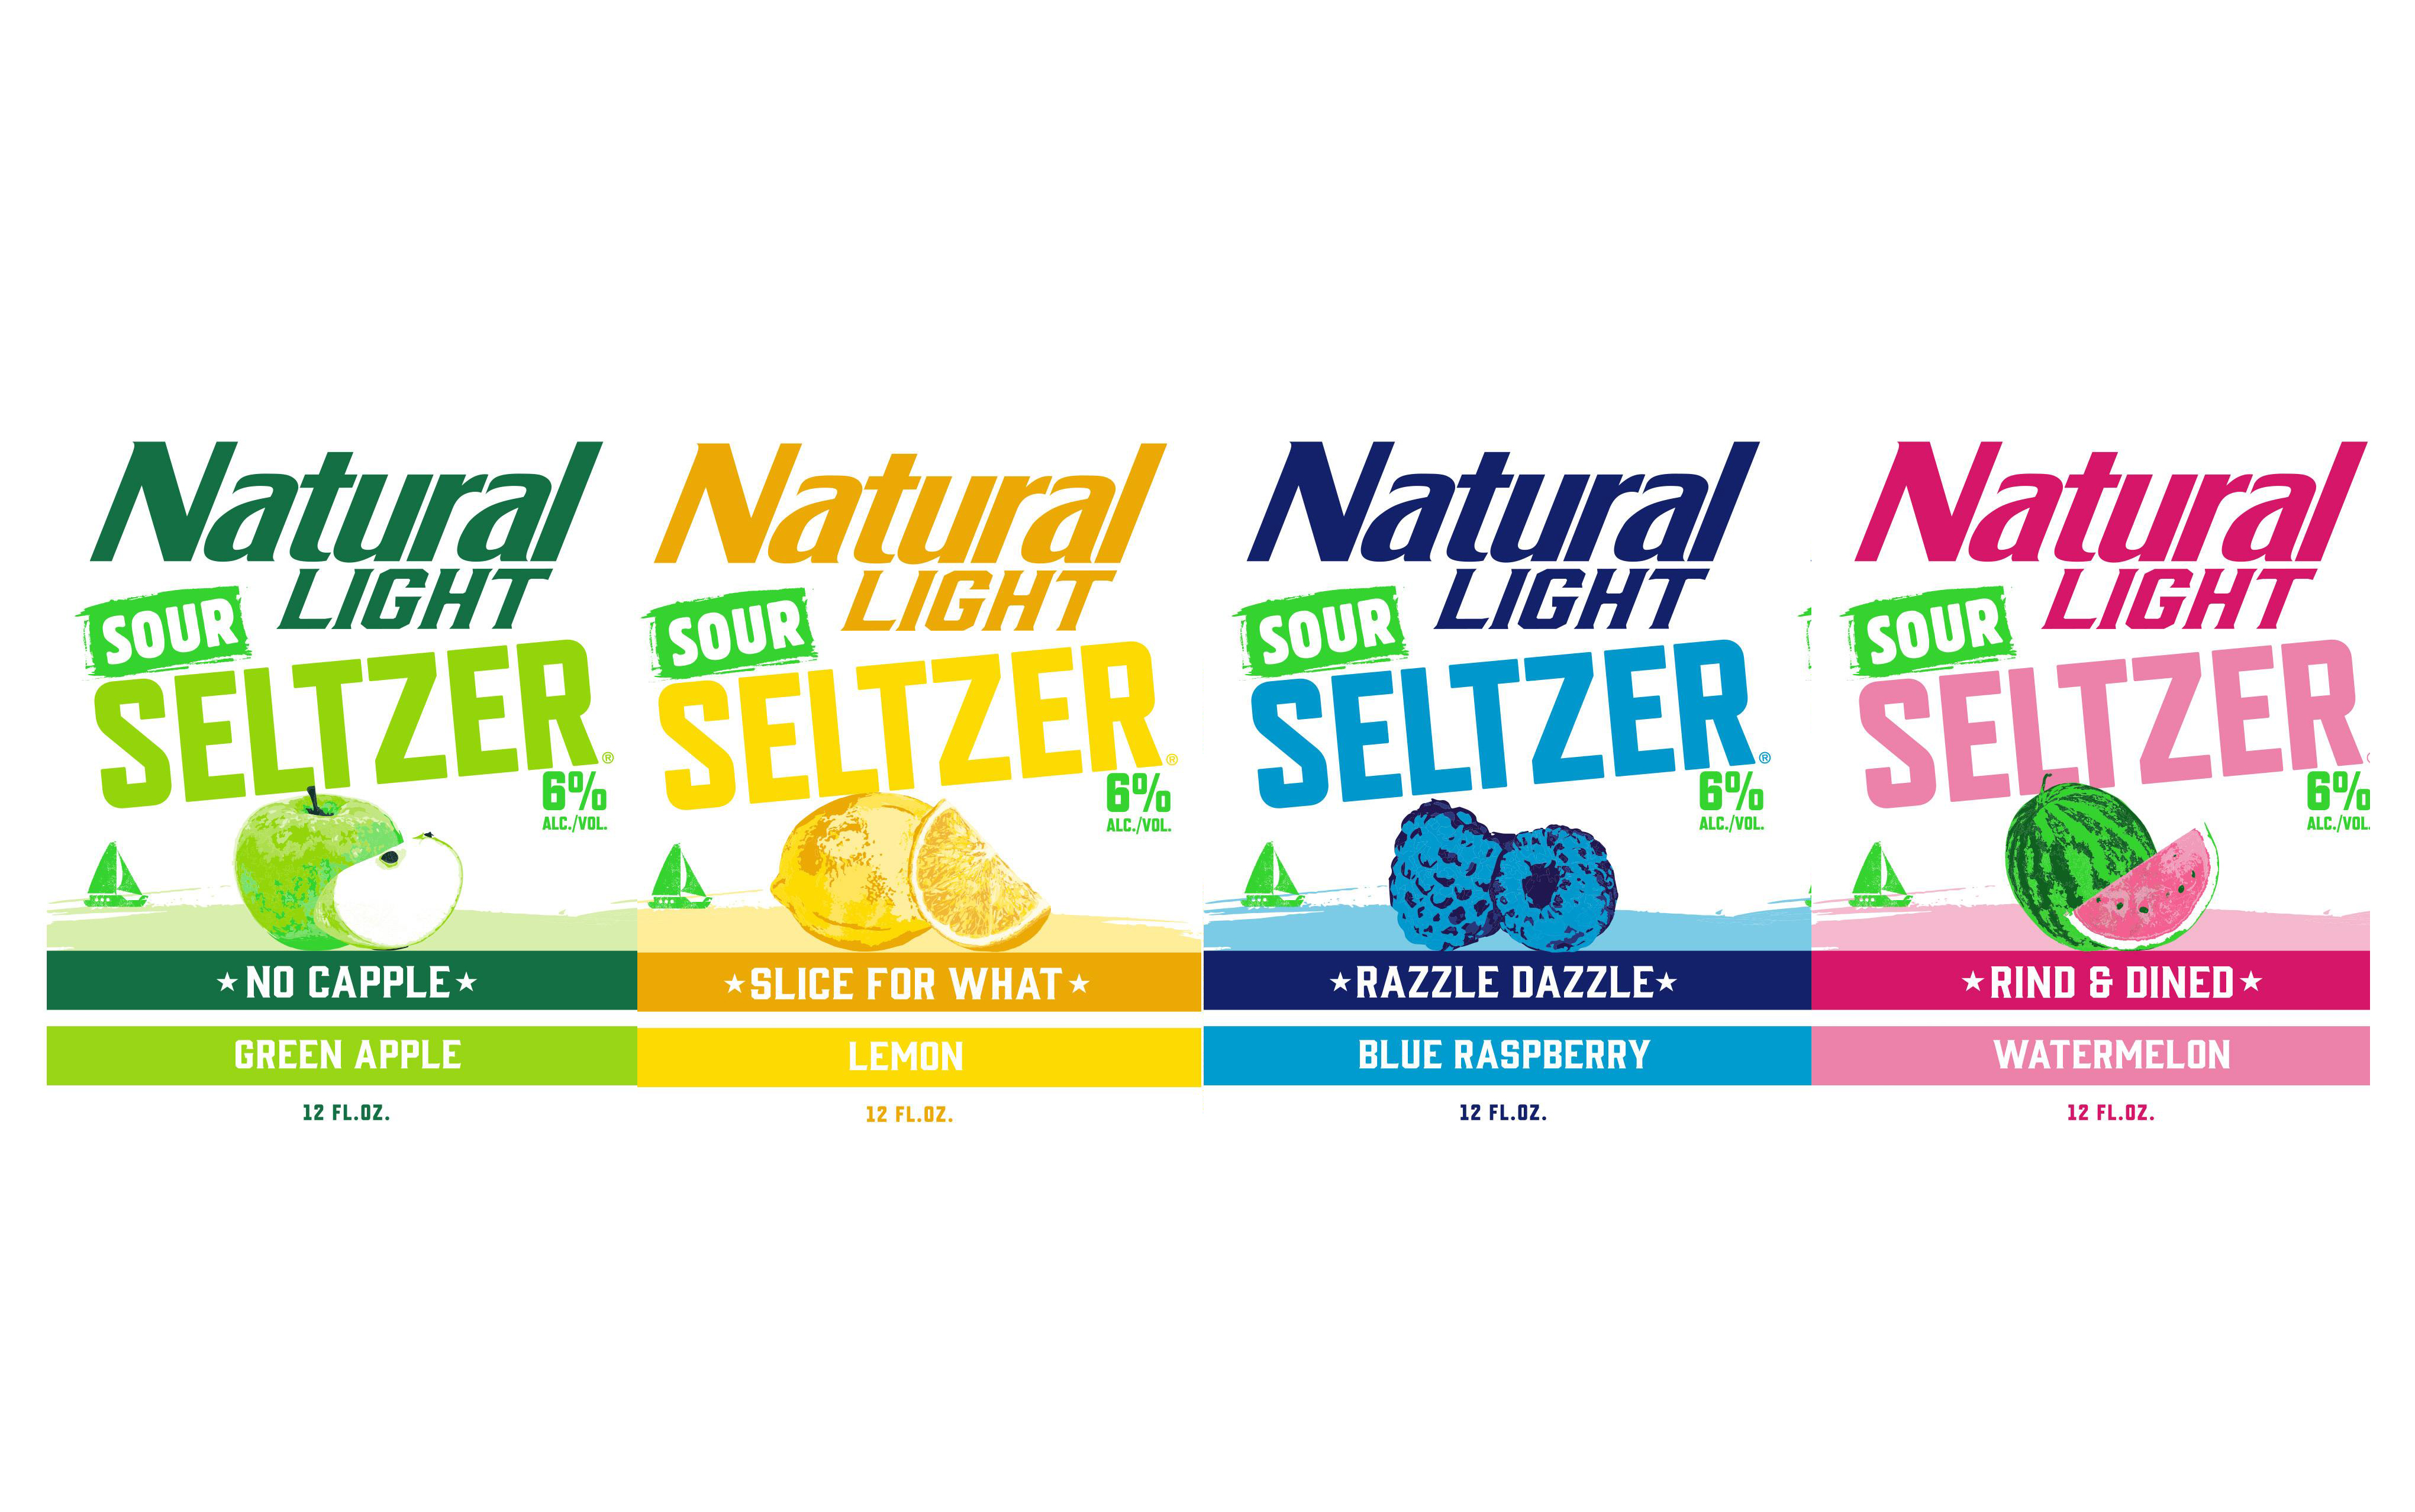 uendelig Latter Modig Is Natural Light looking to launch a Sour Seltzer series? | Molson Coors  Beer & Beyond